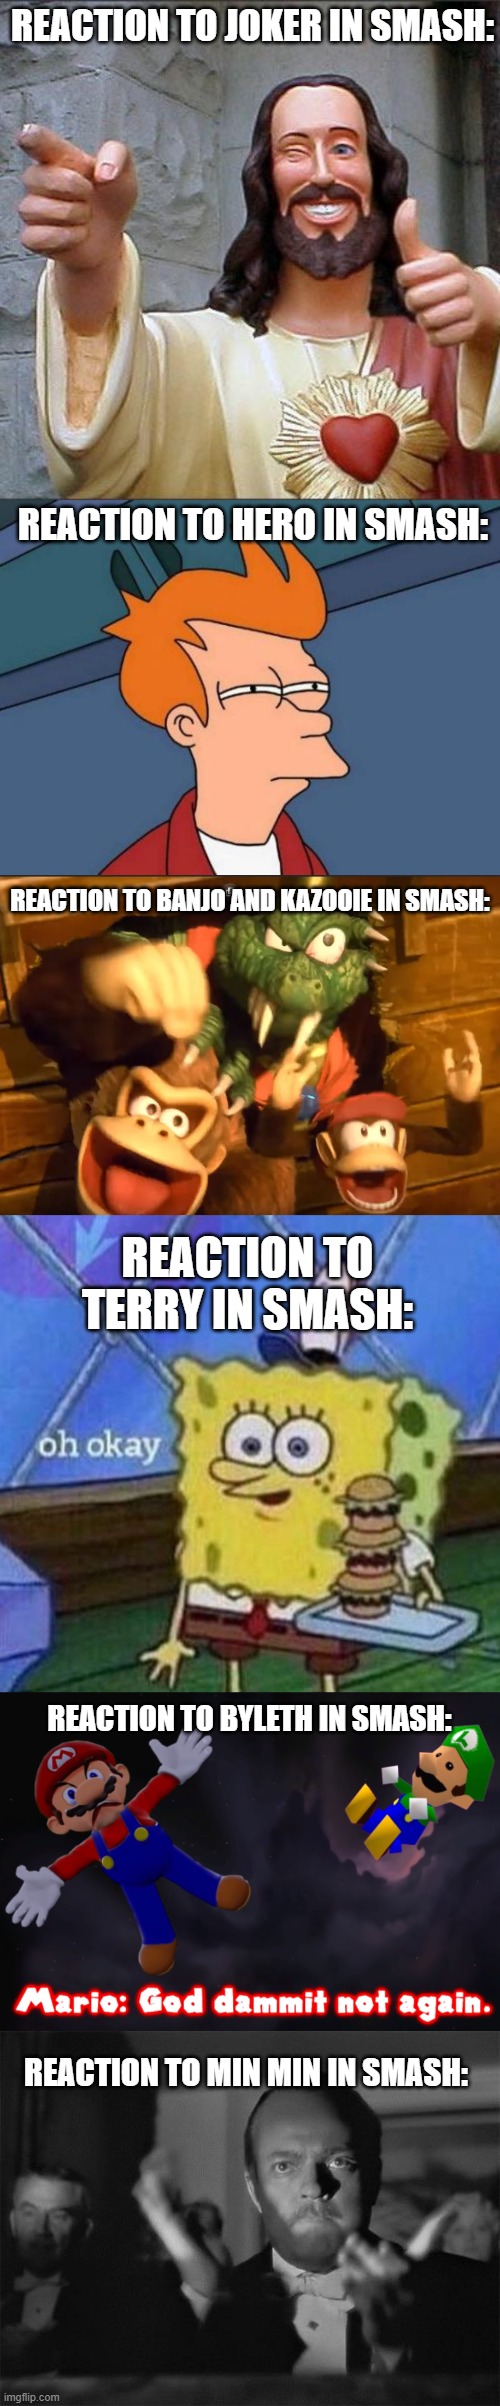 My meme reactions to smash dlc: | REACTION TO JOKER IN SMASH:; REACTION TO HERO IN SMASH:; REACTION TO BANJO AND KAZOOIE IN SMASH:; REACTION TO TERRY IN SMASH:; REACTION TO BYLETH IN SMASH:; REACTION TO MIN MIN IN SMASH: | image tagged in buddy christ,futurama fry,clapping,oh okay spongebob,smg4 mario not again,super smash bros | made w/ Imgflip meme maker